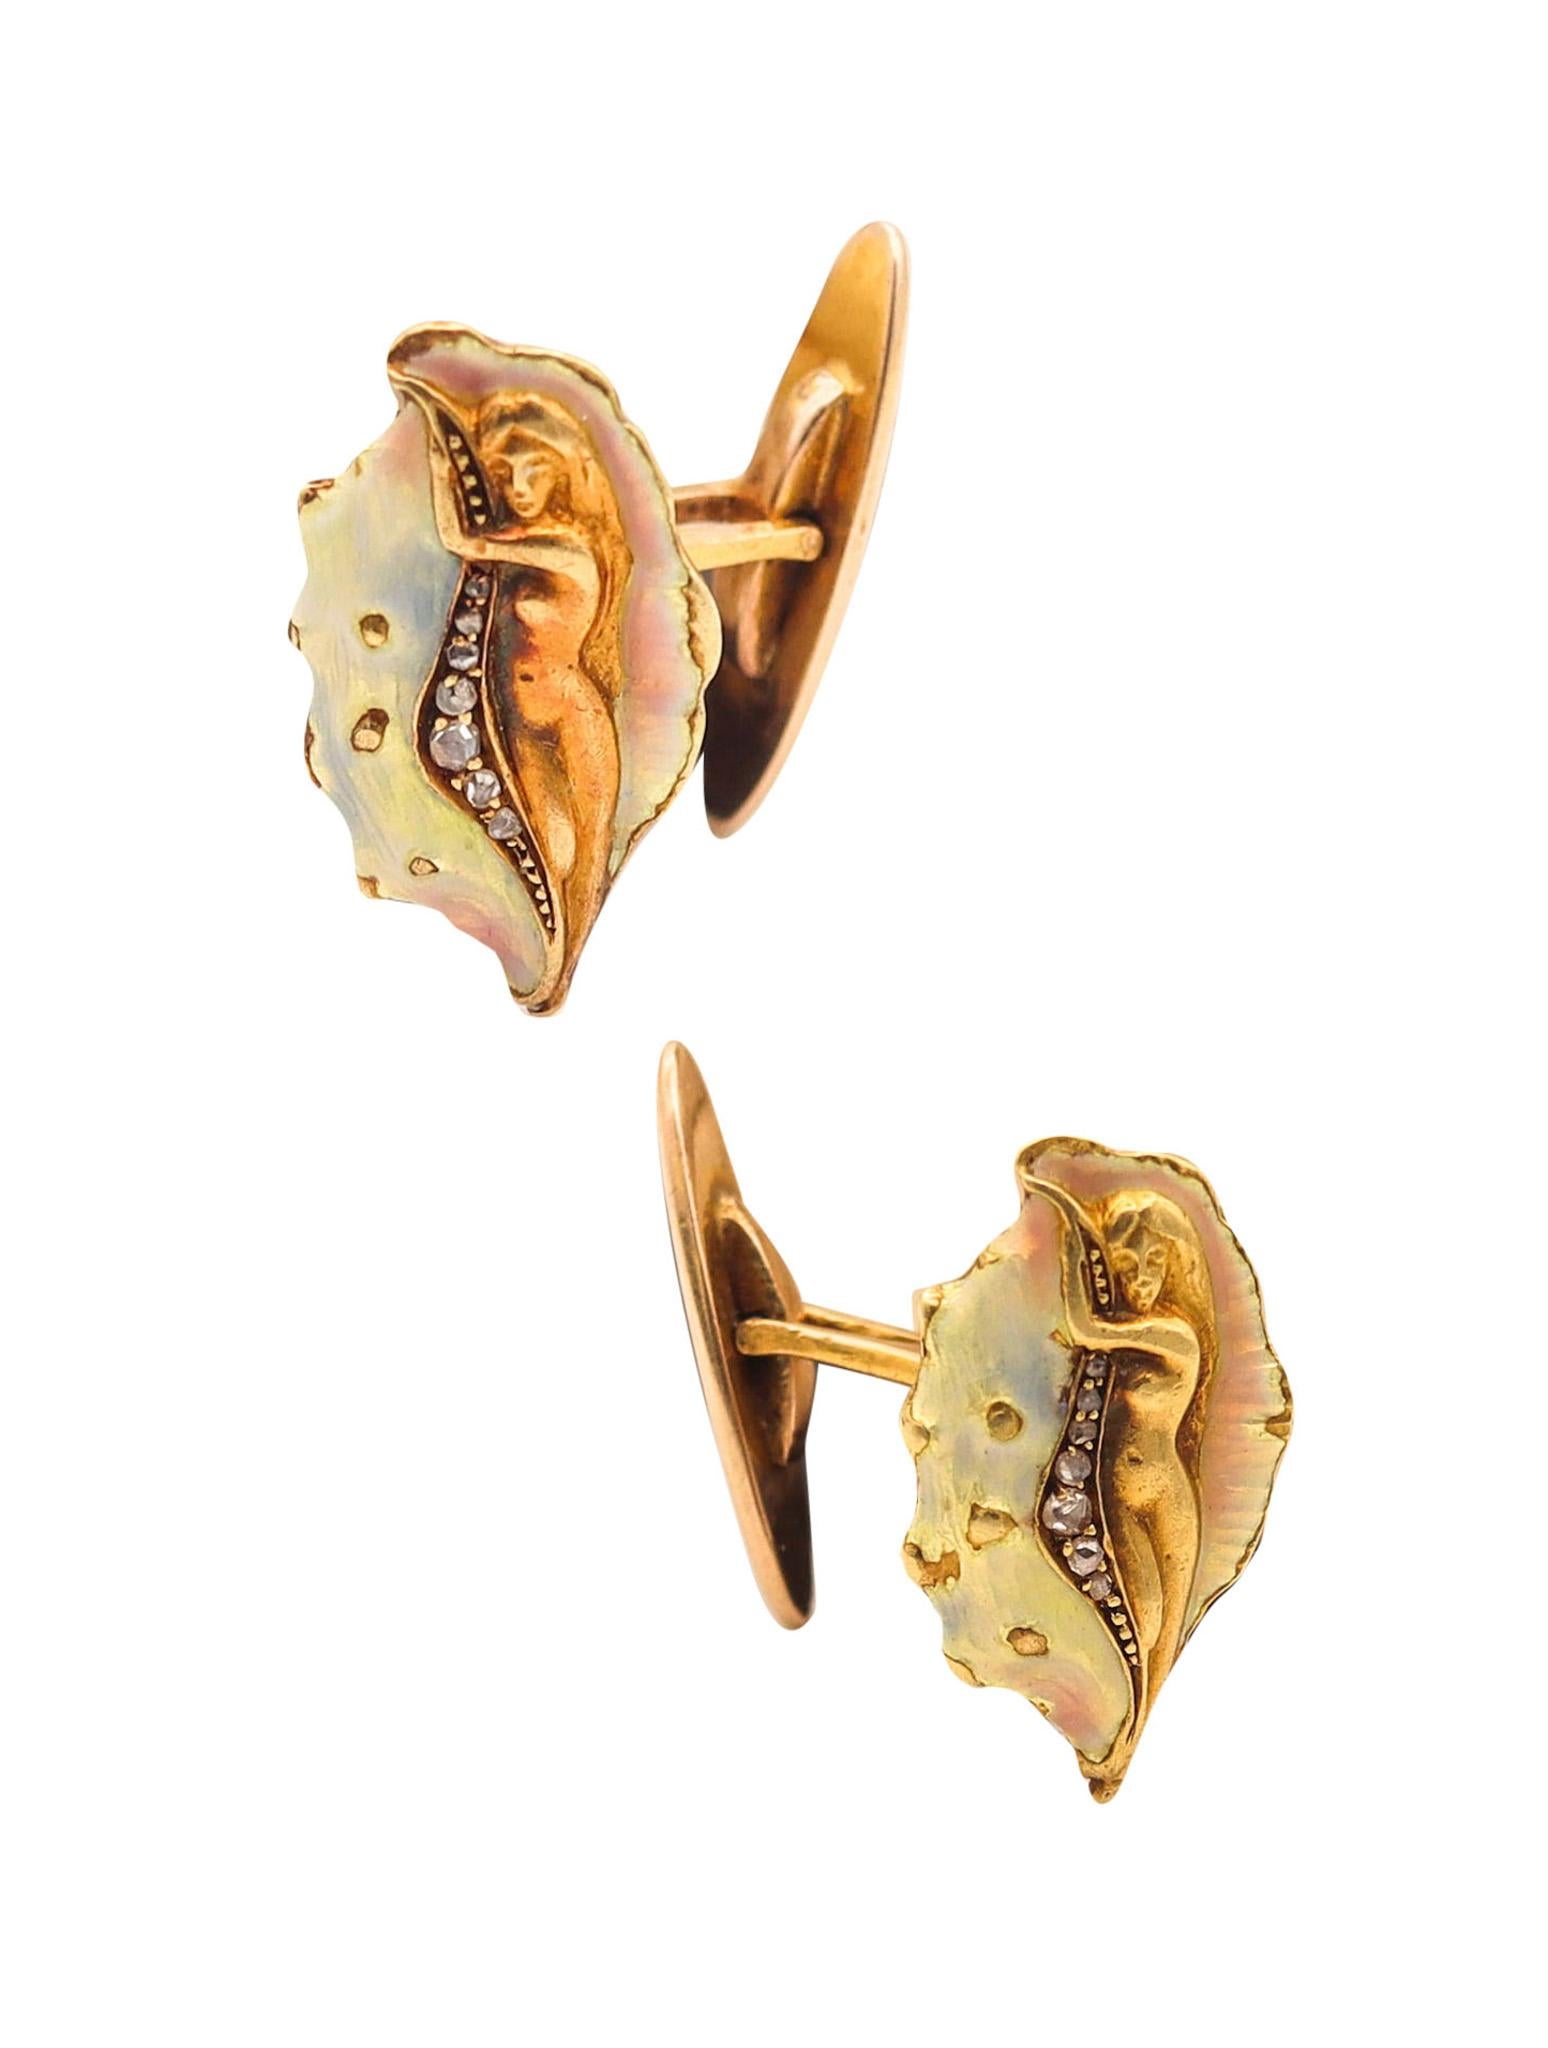 Germany 1900 Art Nouveau Enameled Cufflinks In 18Kt Gold With Diamonds With Box For Sale